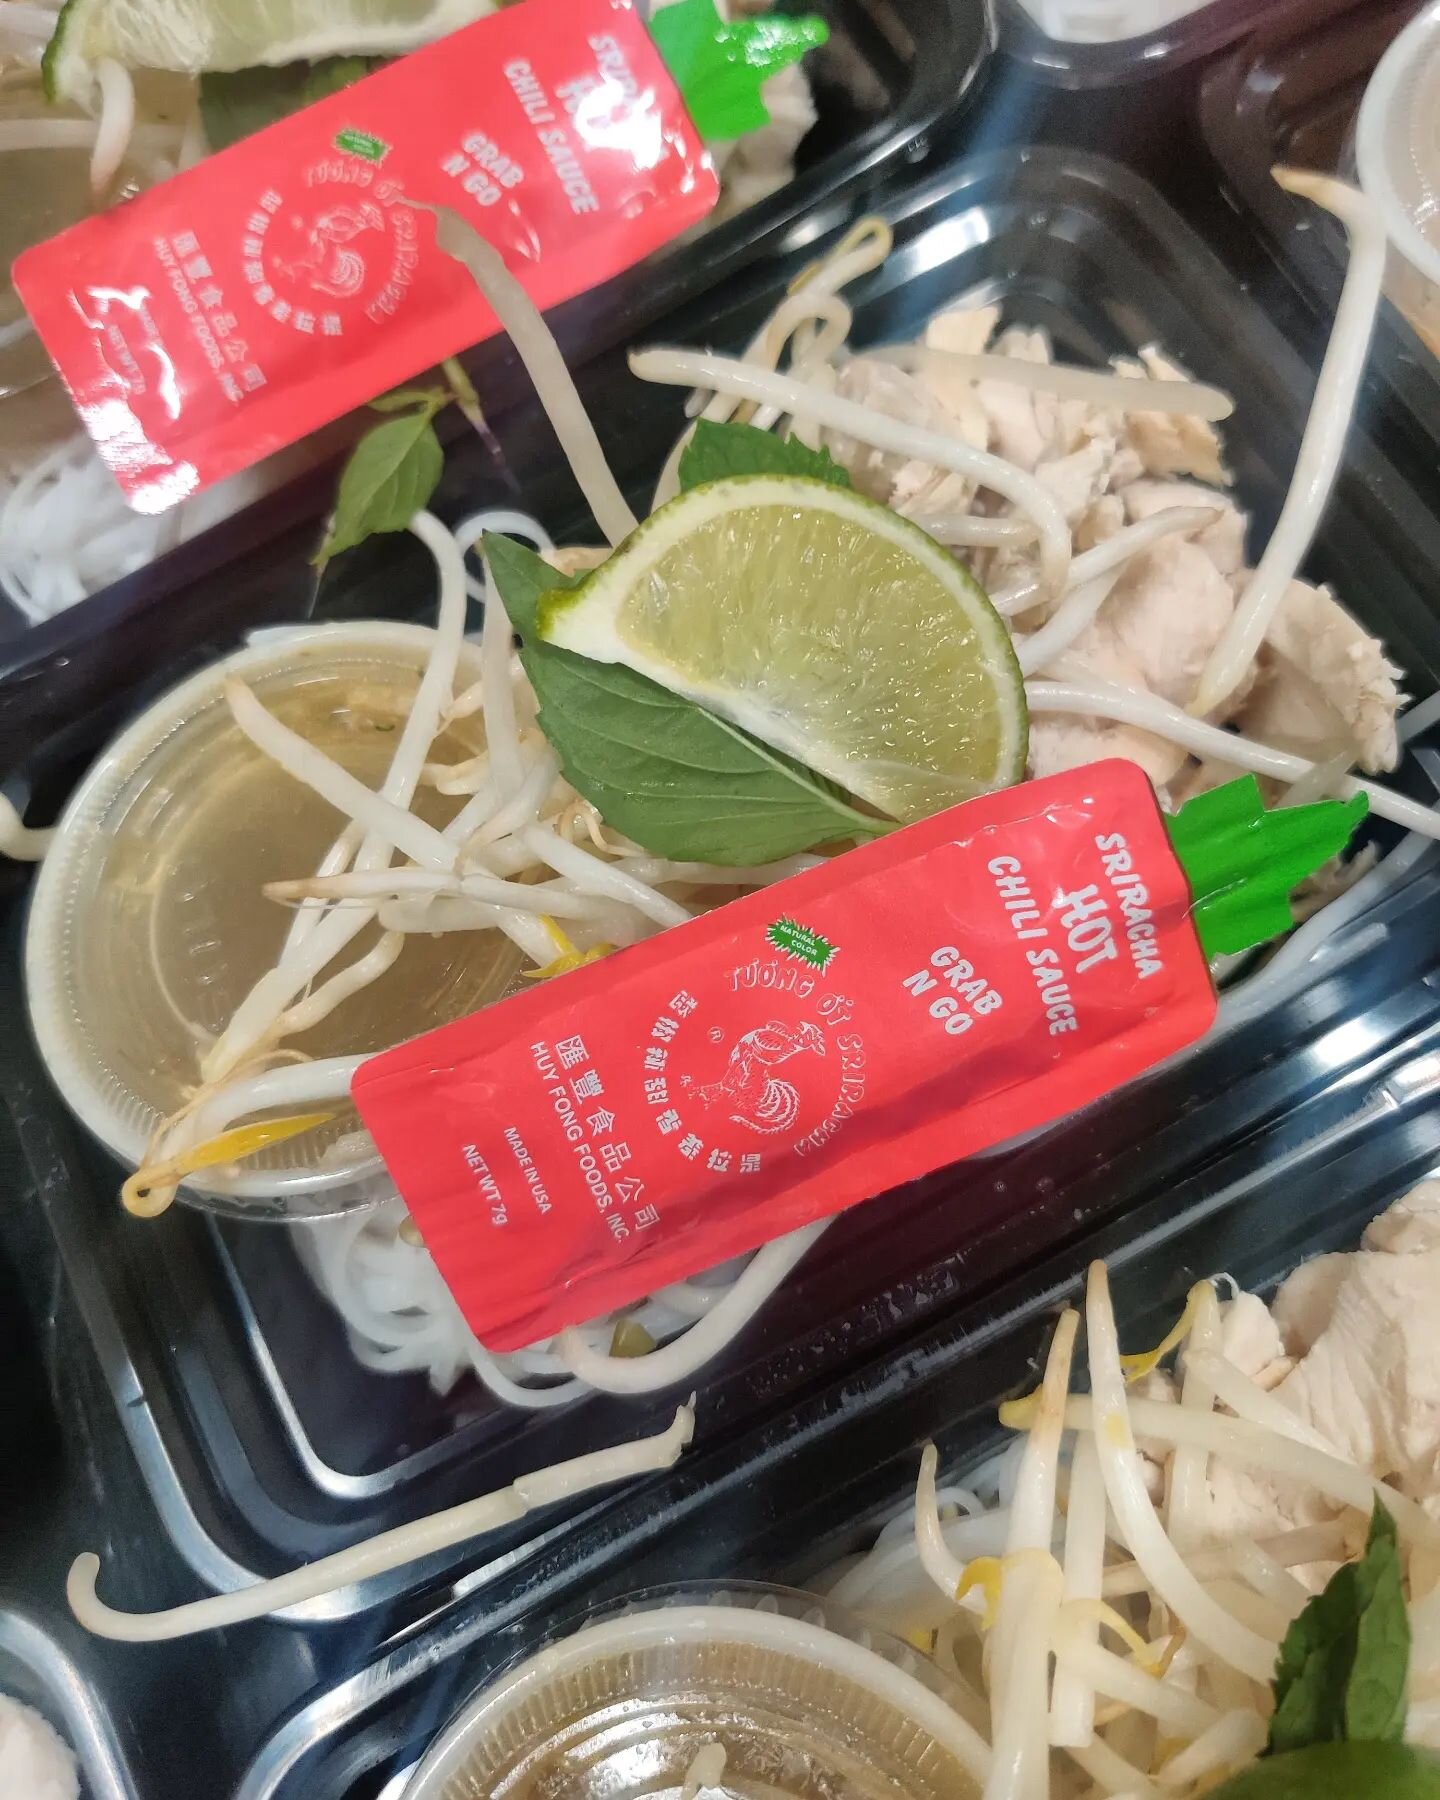 Due to customer request, for this week only, we brought back the Pho Bowl!

Use code: SAVINGPHOVDAY at checkout

Love you, Pho real.